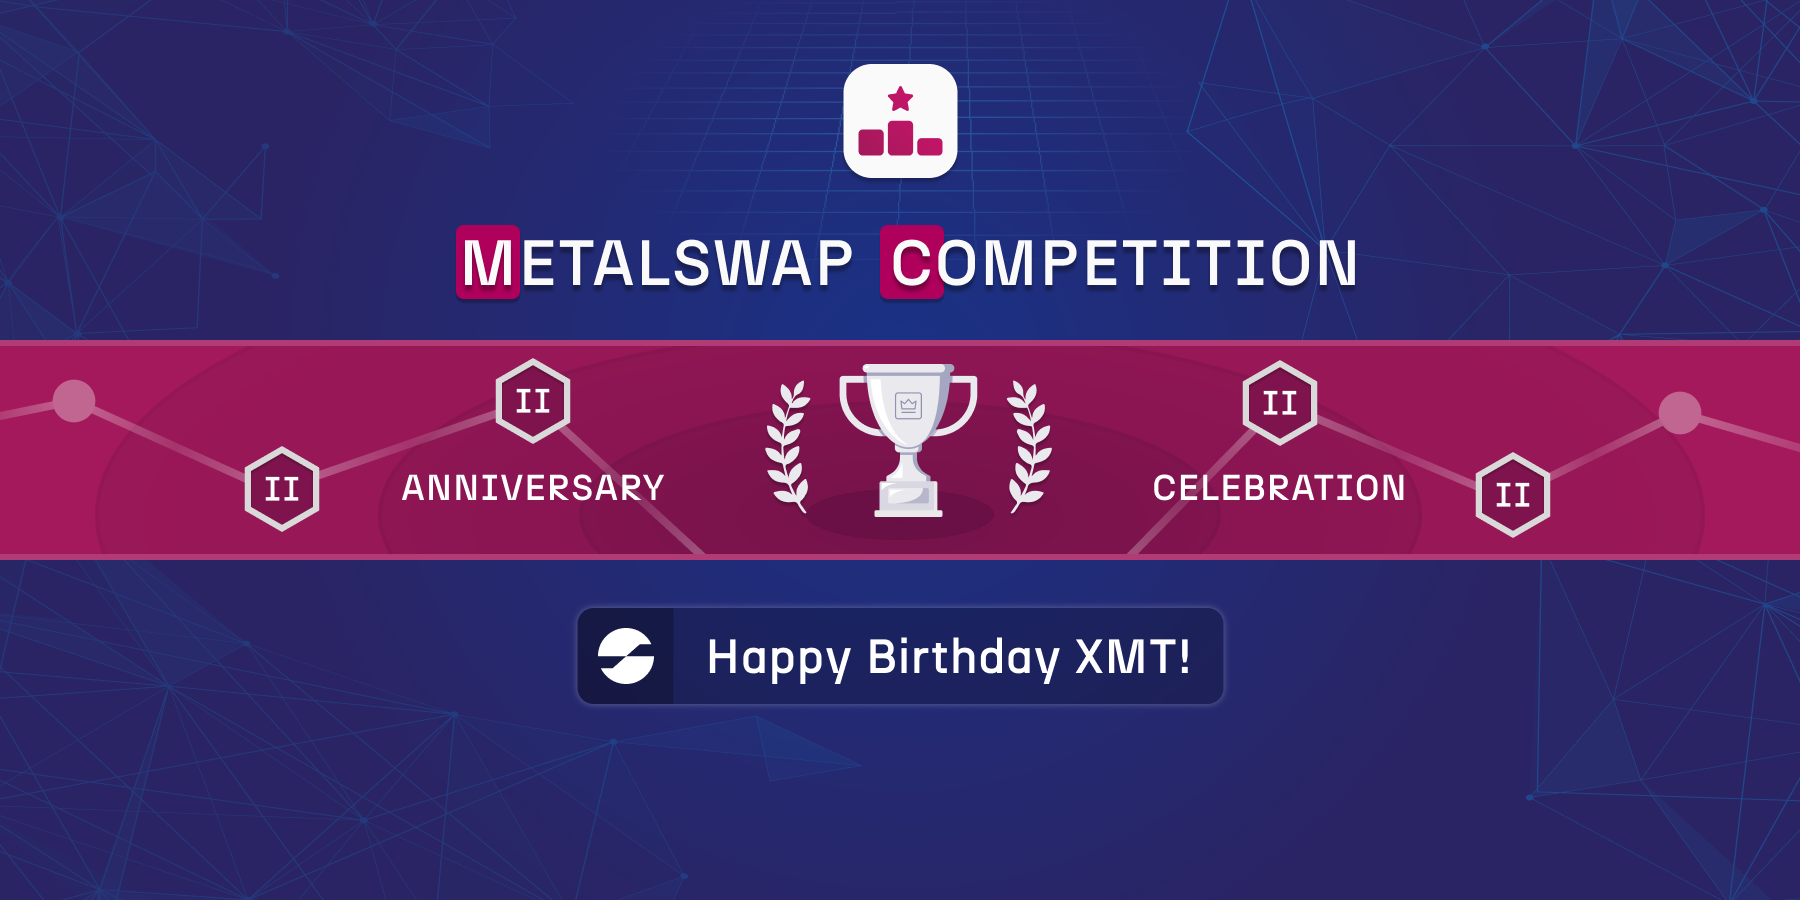 MetalSwap Competition - Happy Birthday XMT [TWITTER]